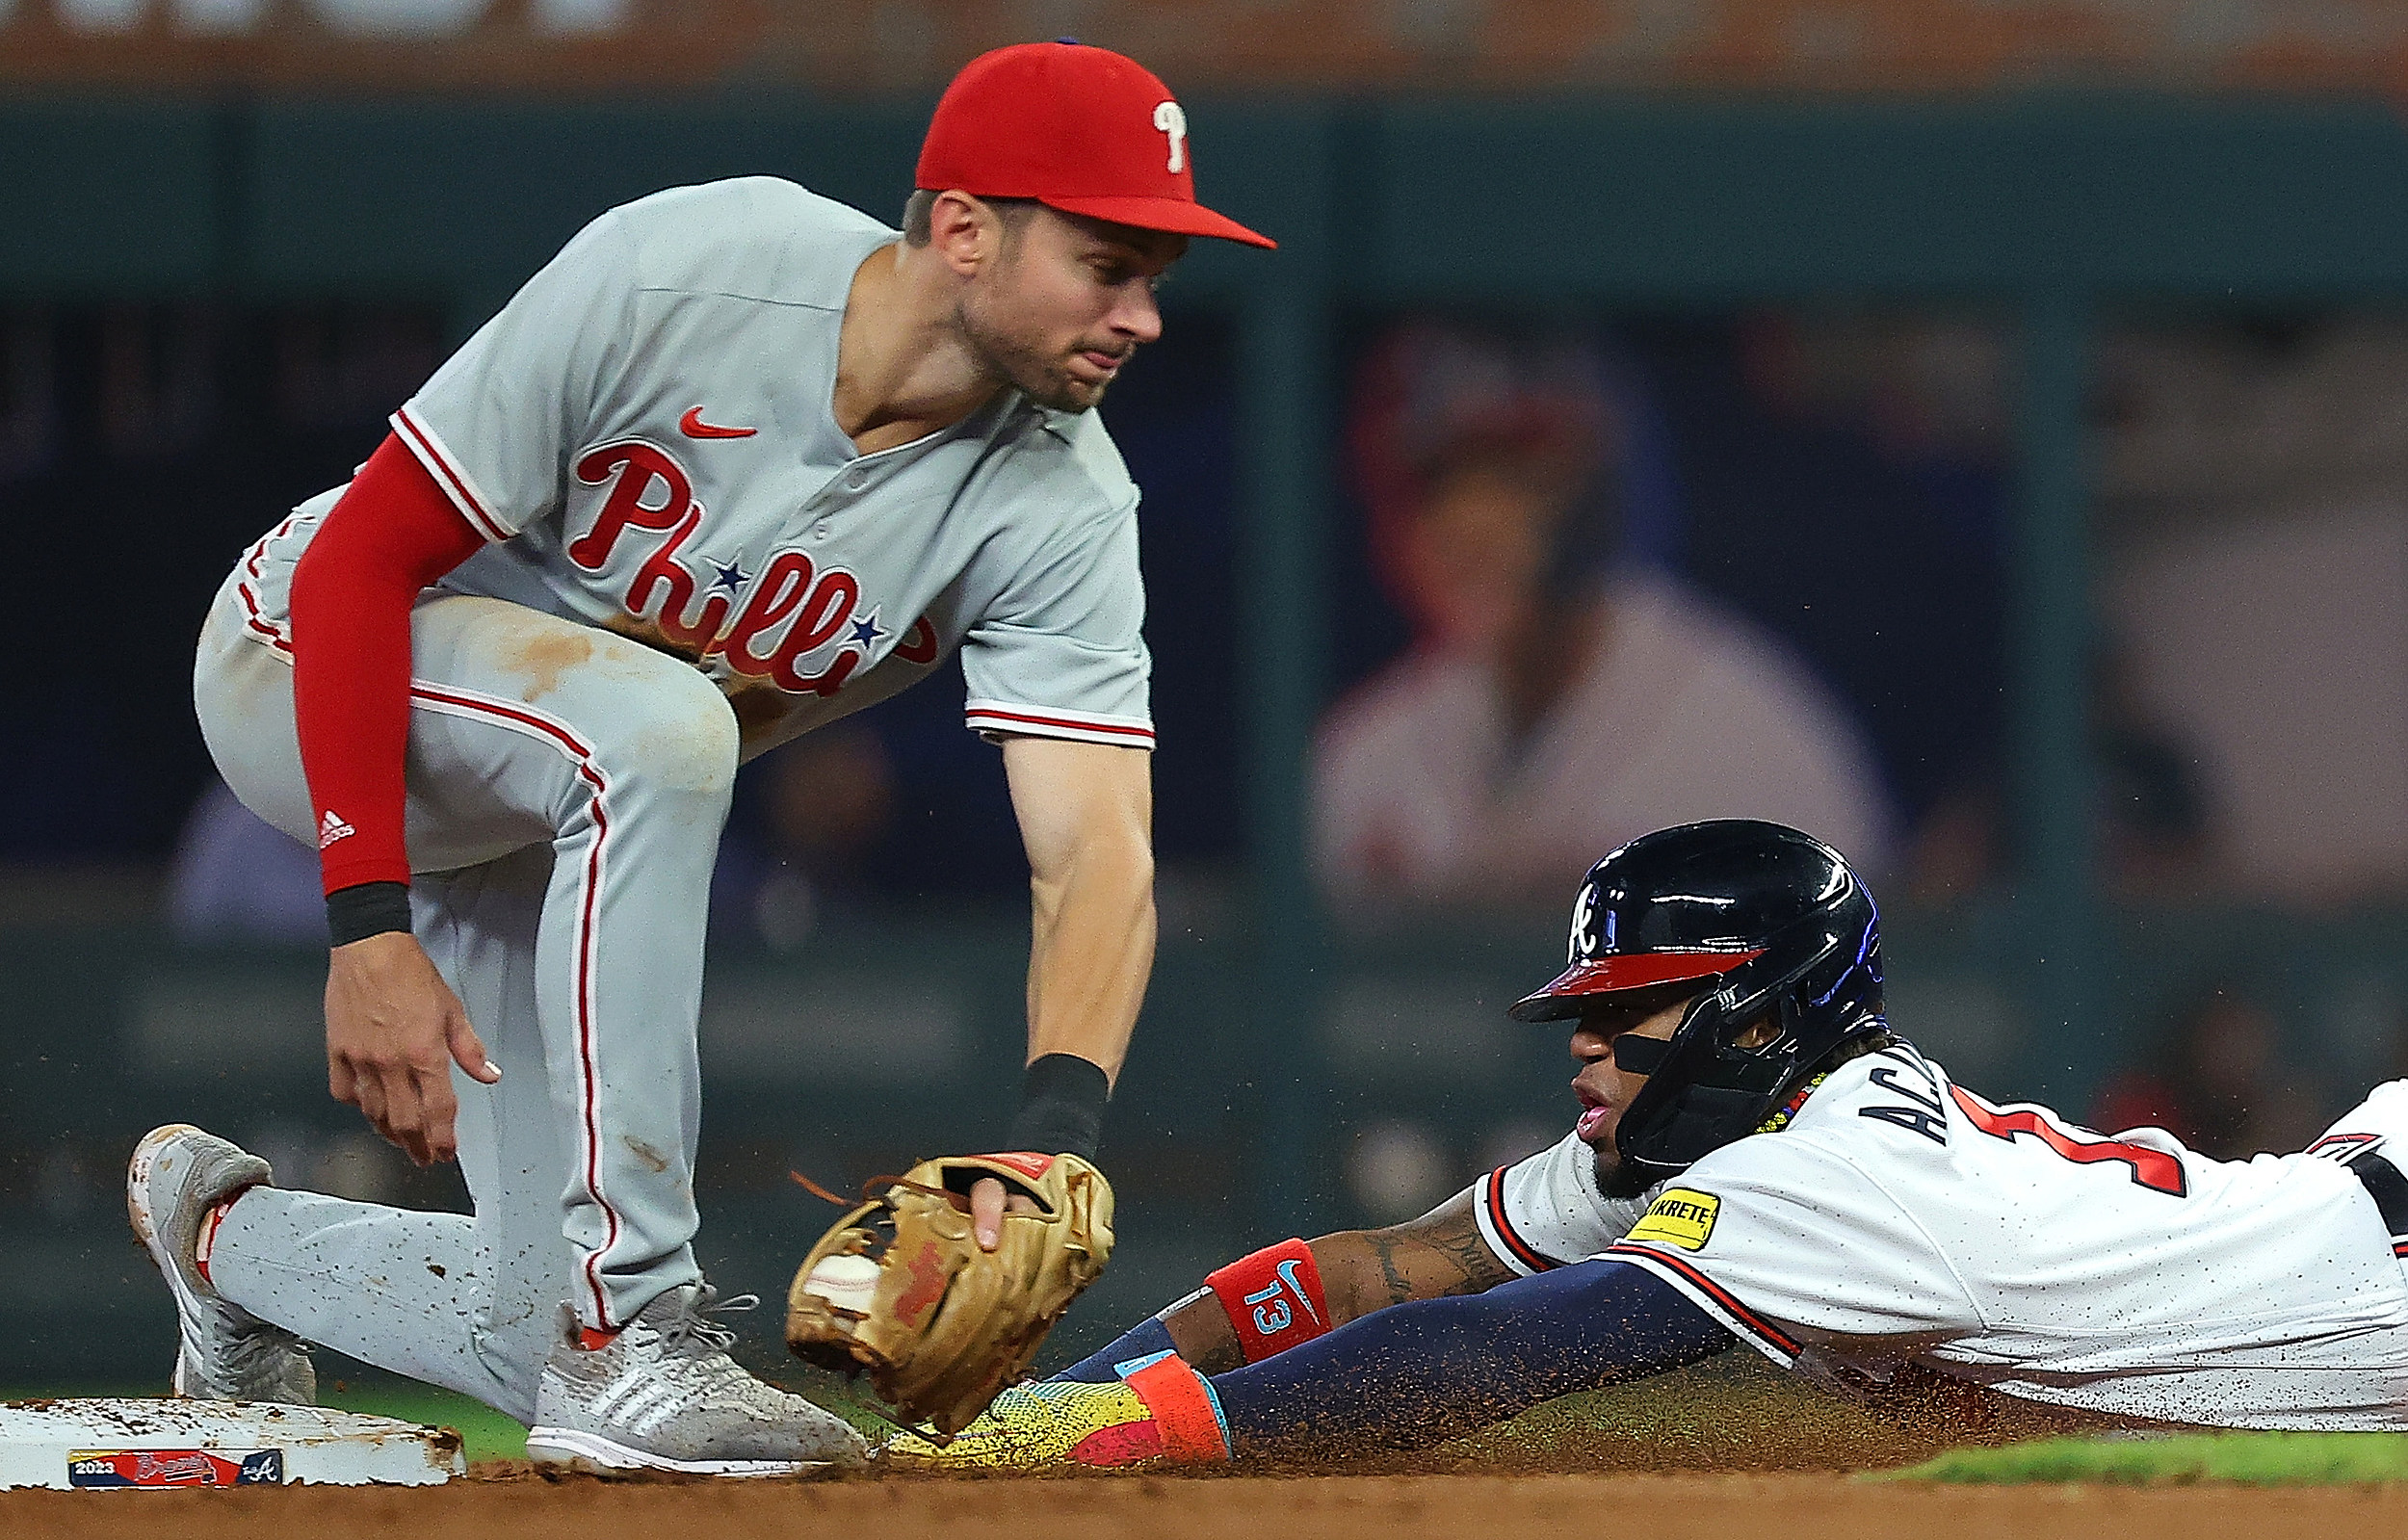 Philadelphia Phillies 2023 schedule: Dates, times, opponents announced